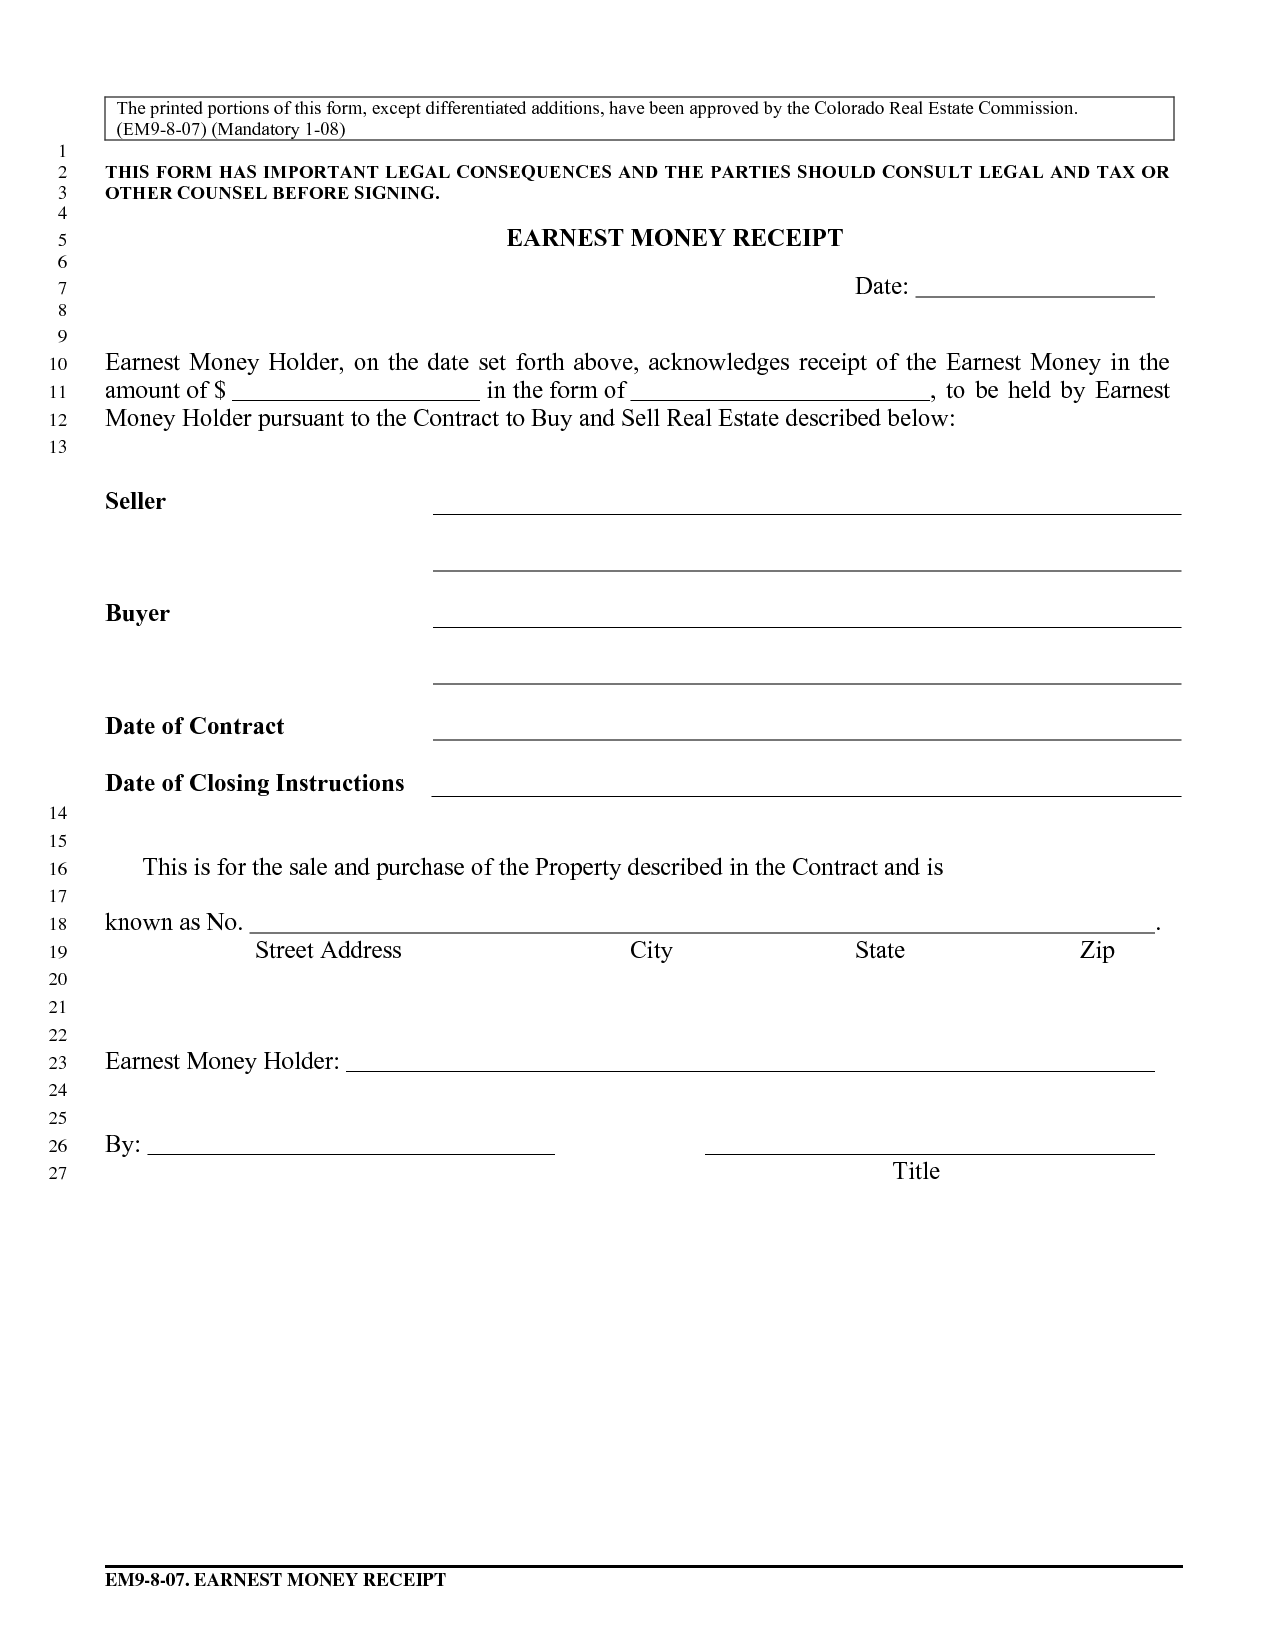 earnest-money-agreement-form-template-free-printable-documents